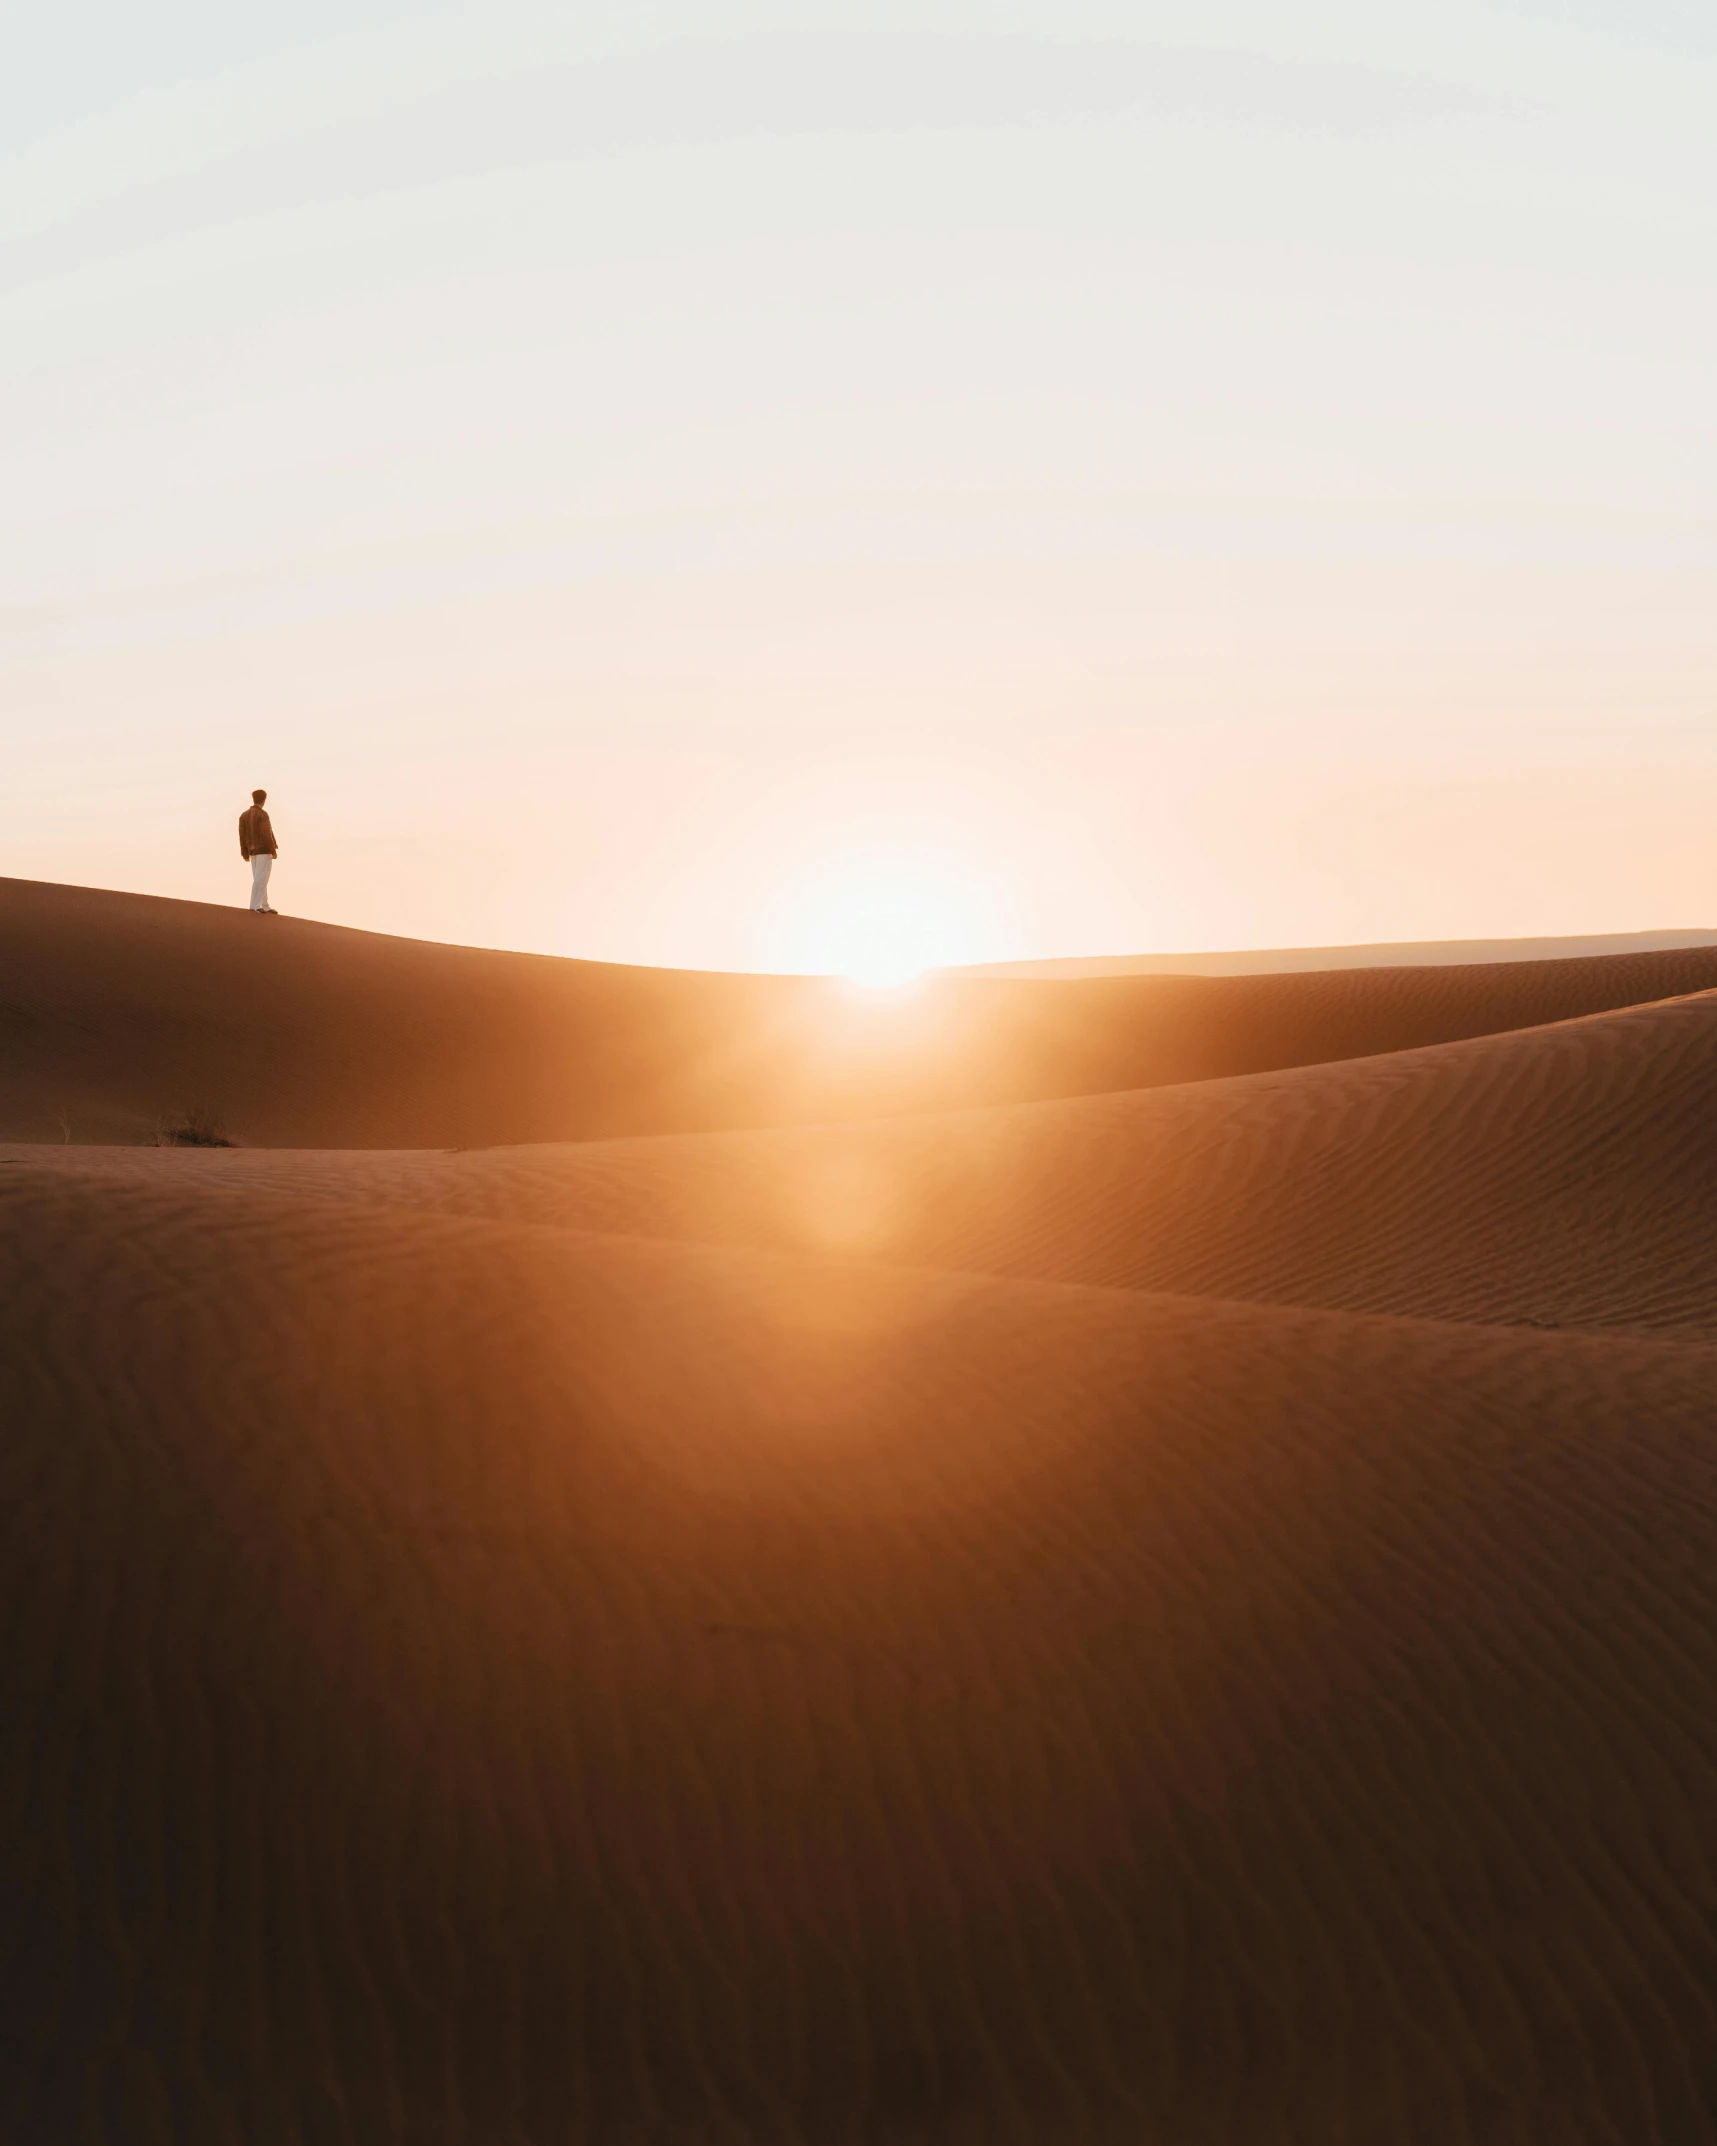 a person standing in the middle of a desert, during a sunset